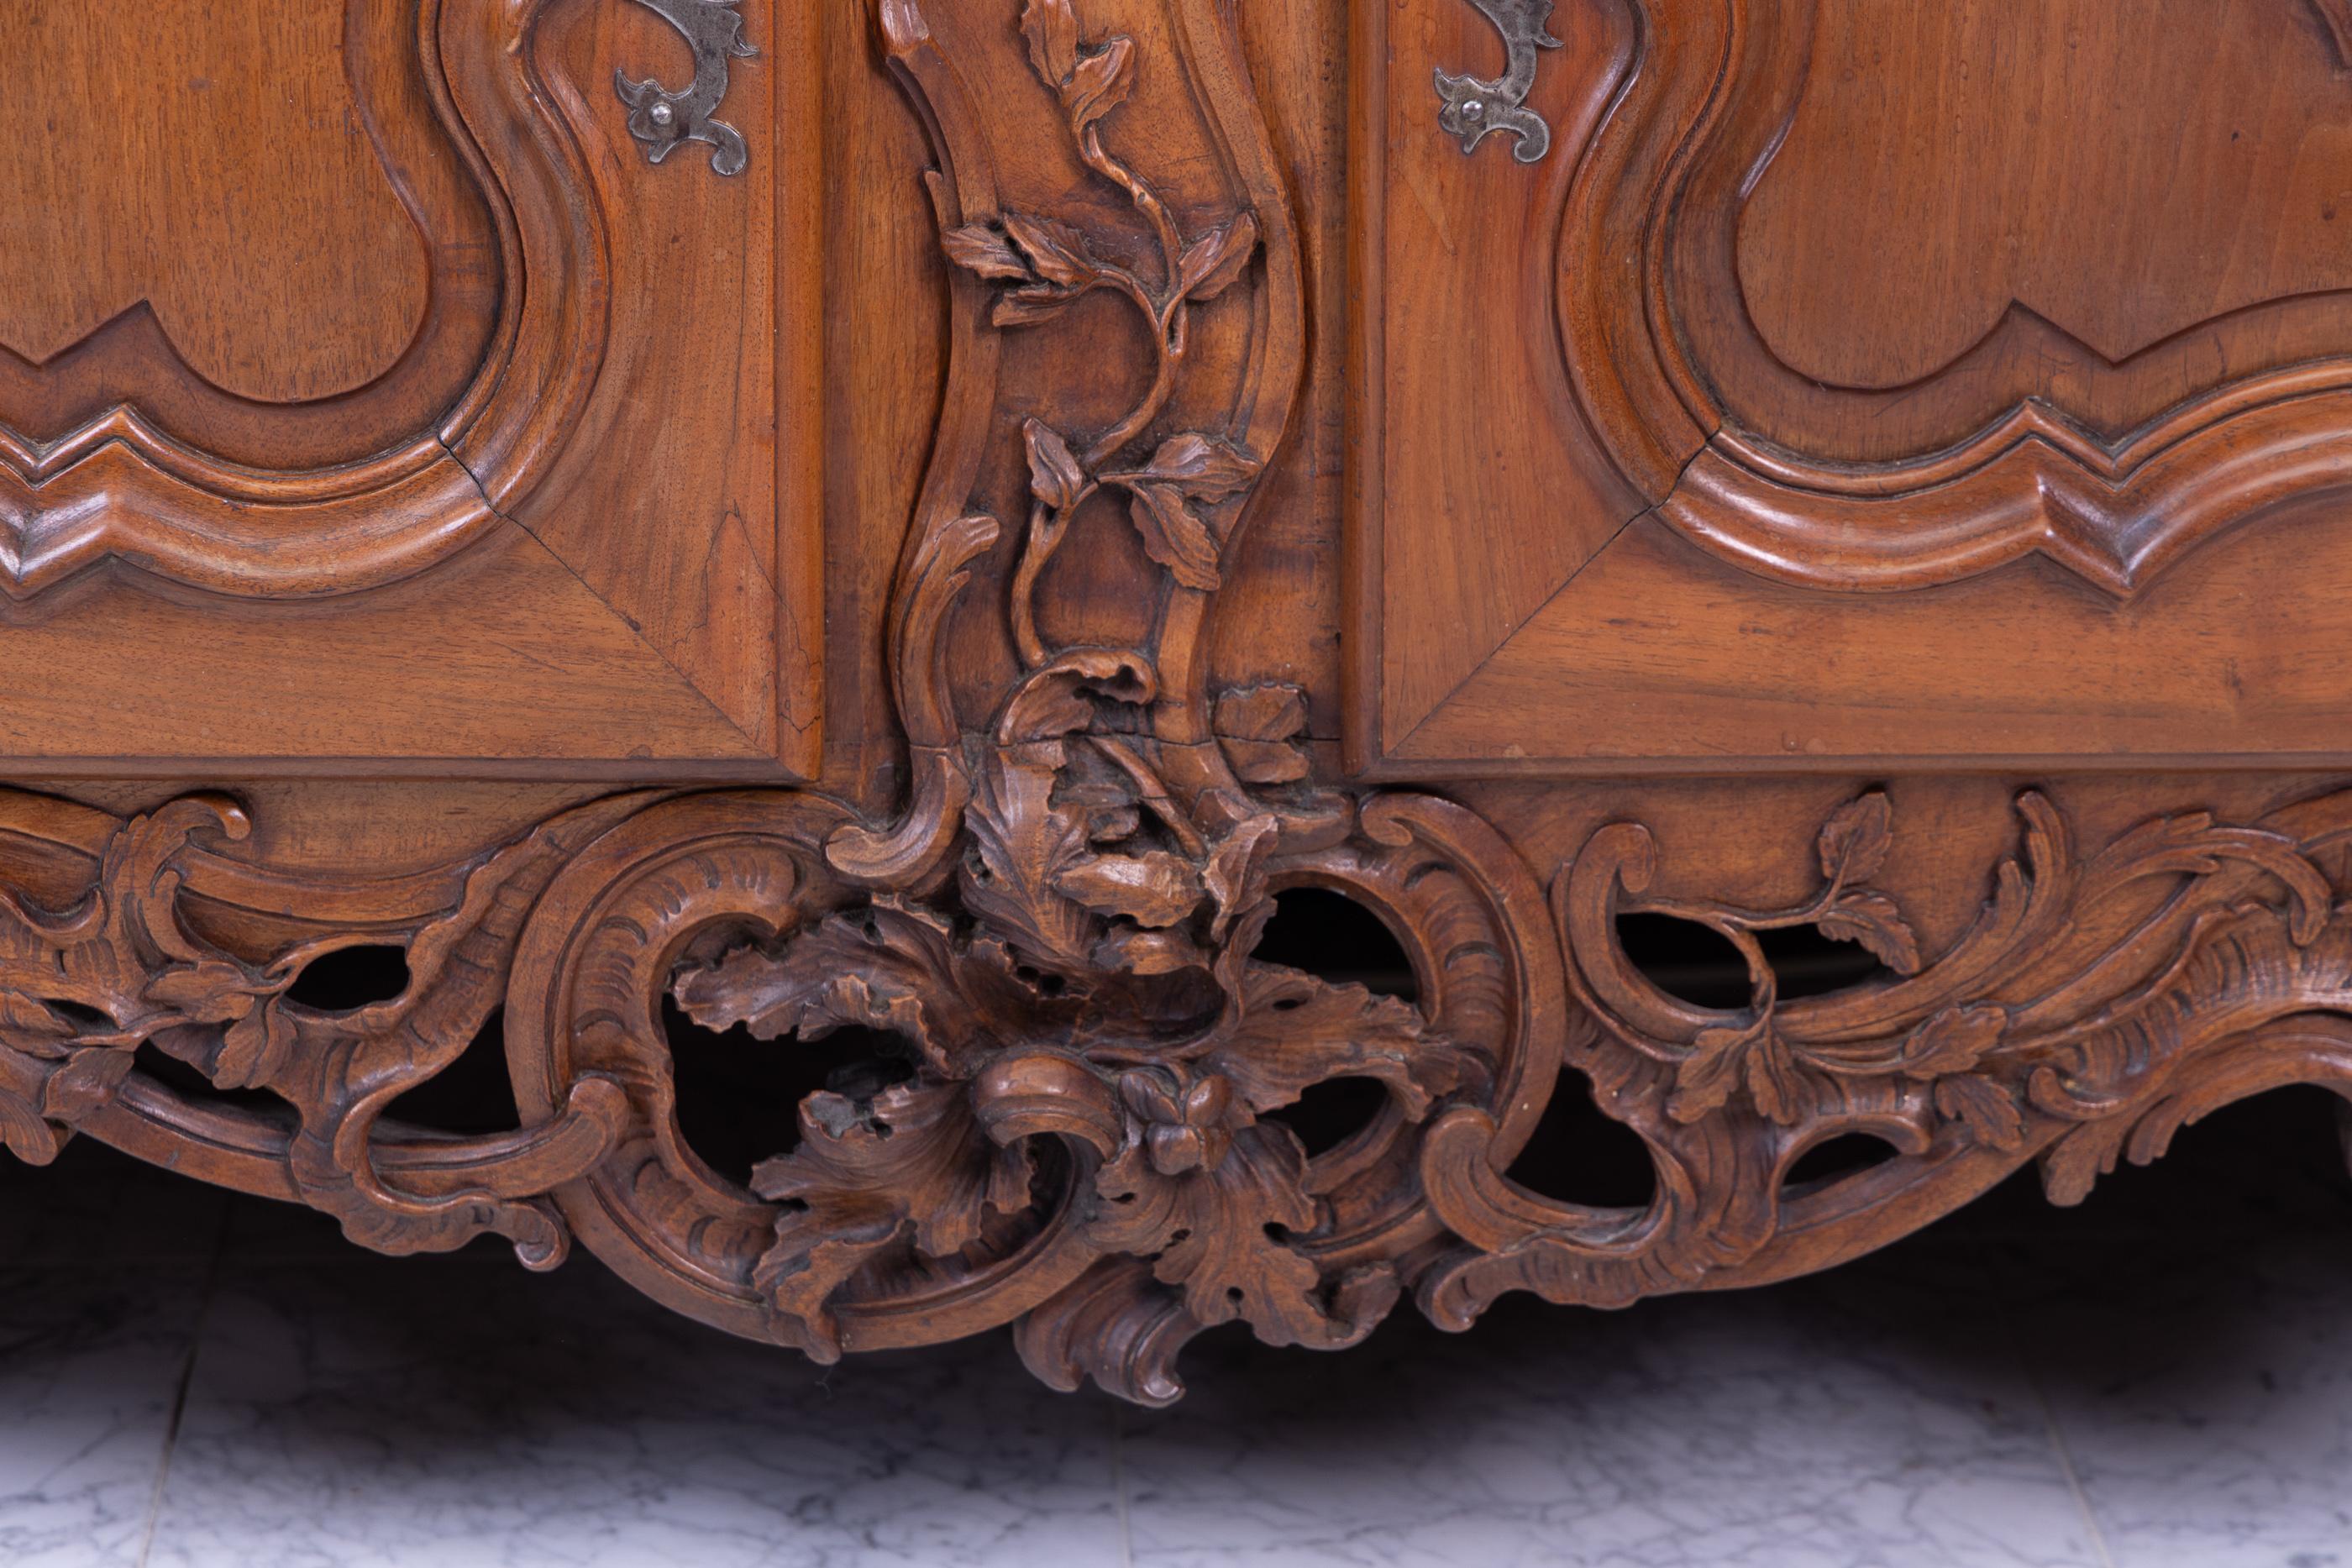 Exquisite 18th century Lyonnaise Carved Walnut Buffet, Country French  For Sale 1